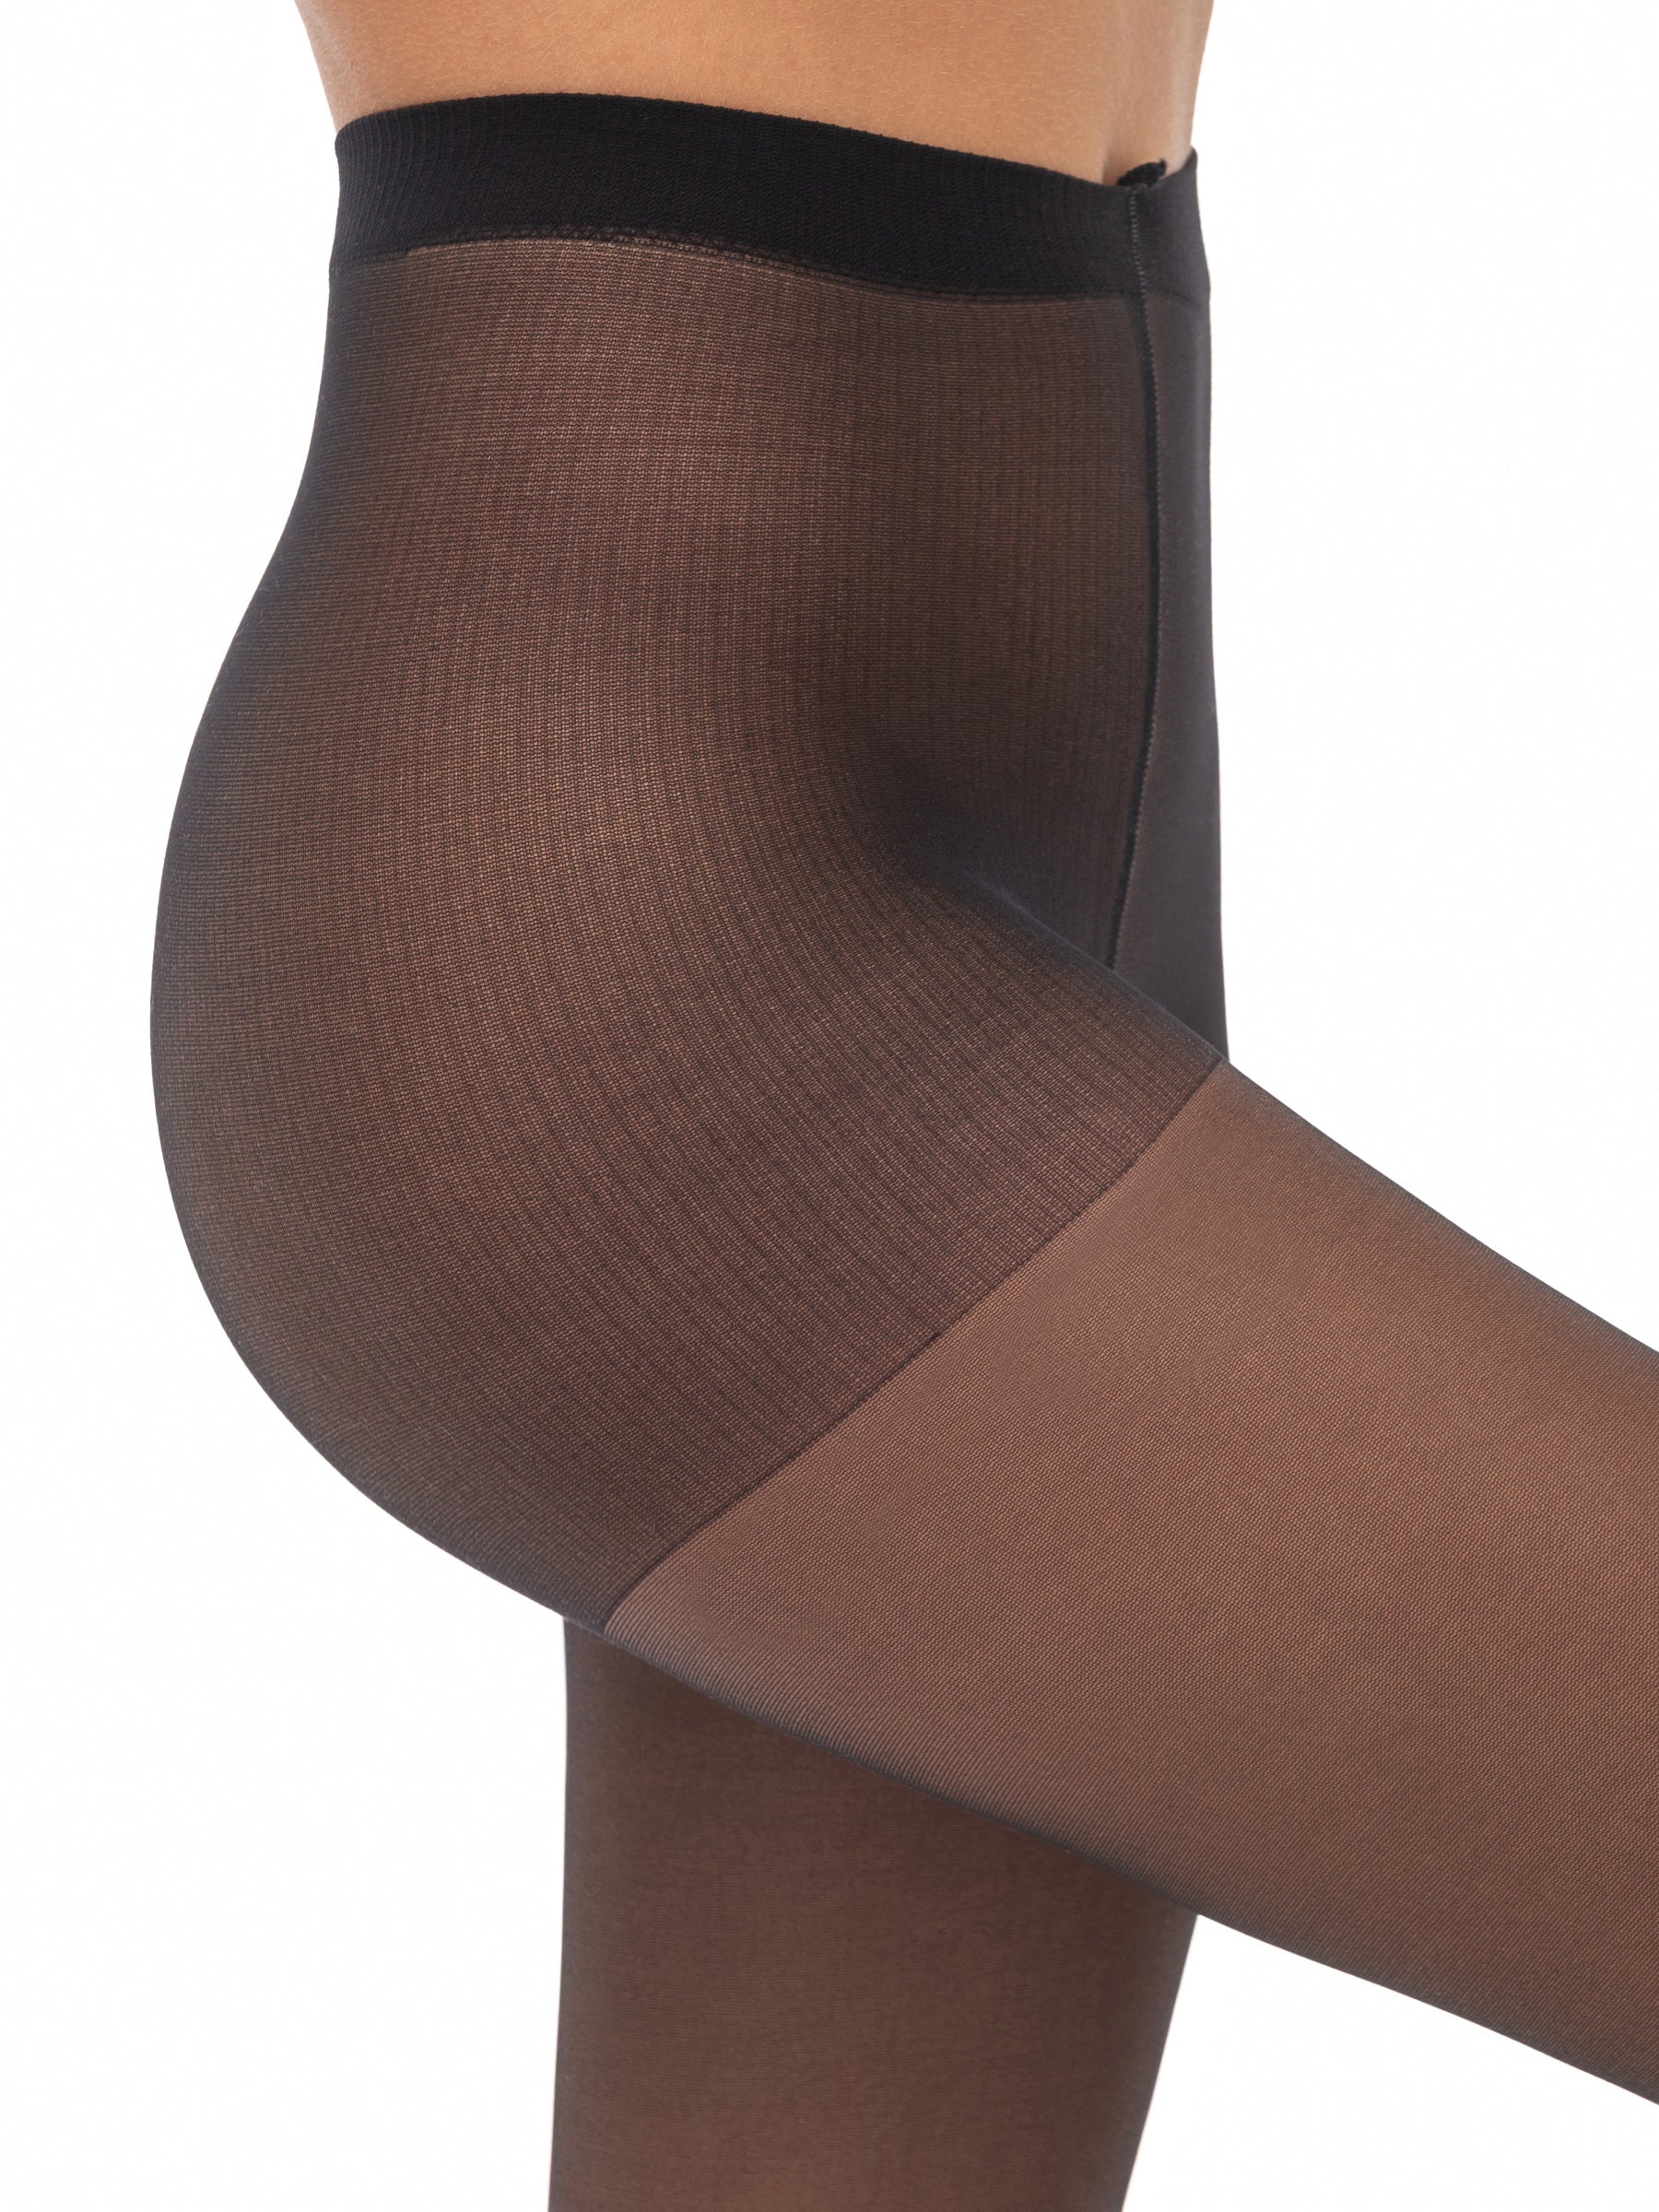 Opaque Tights, Extra Thick 40 & 100 Denier, Womens Ladies Sizes S M L XL